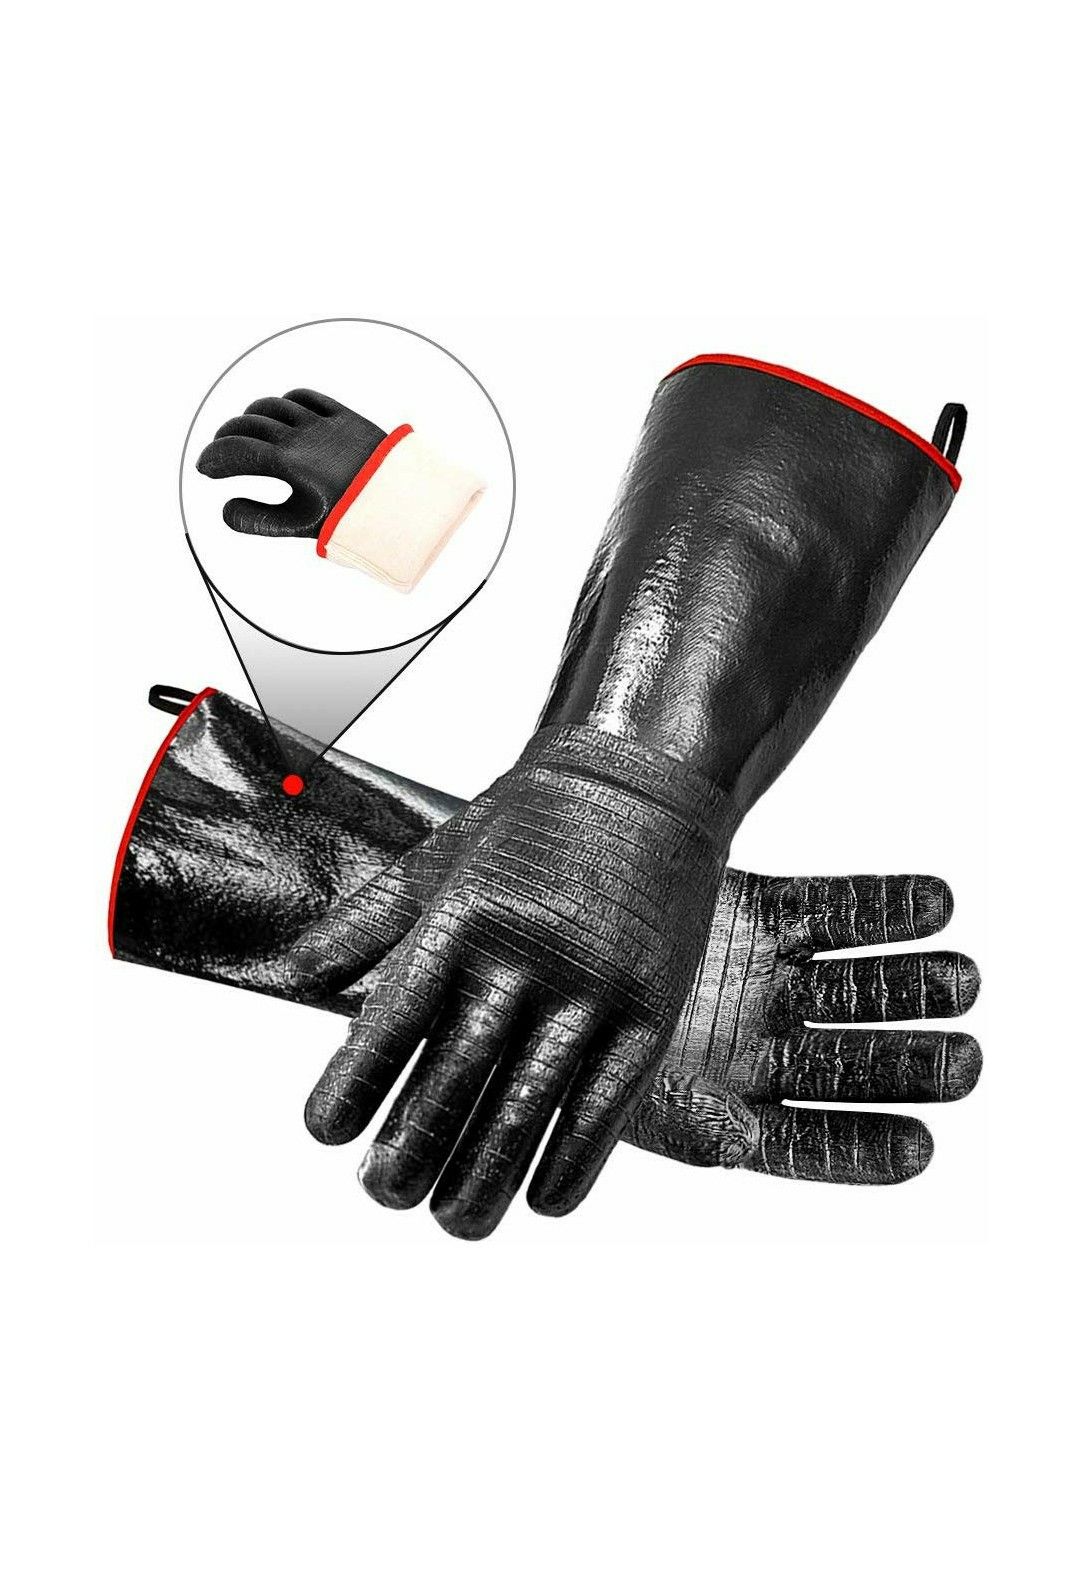 (W192) iHarbort long Protective Grill Gloves, 1 Pair, 1292℉ Heat Resistant BBQ Oven Gloves, Fire&Oil Resistant Waterproof Kitchen Mitts Potholders